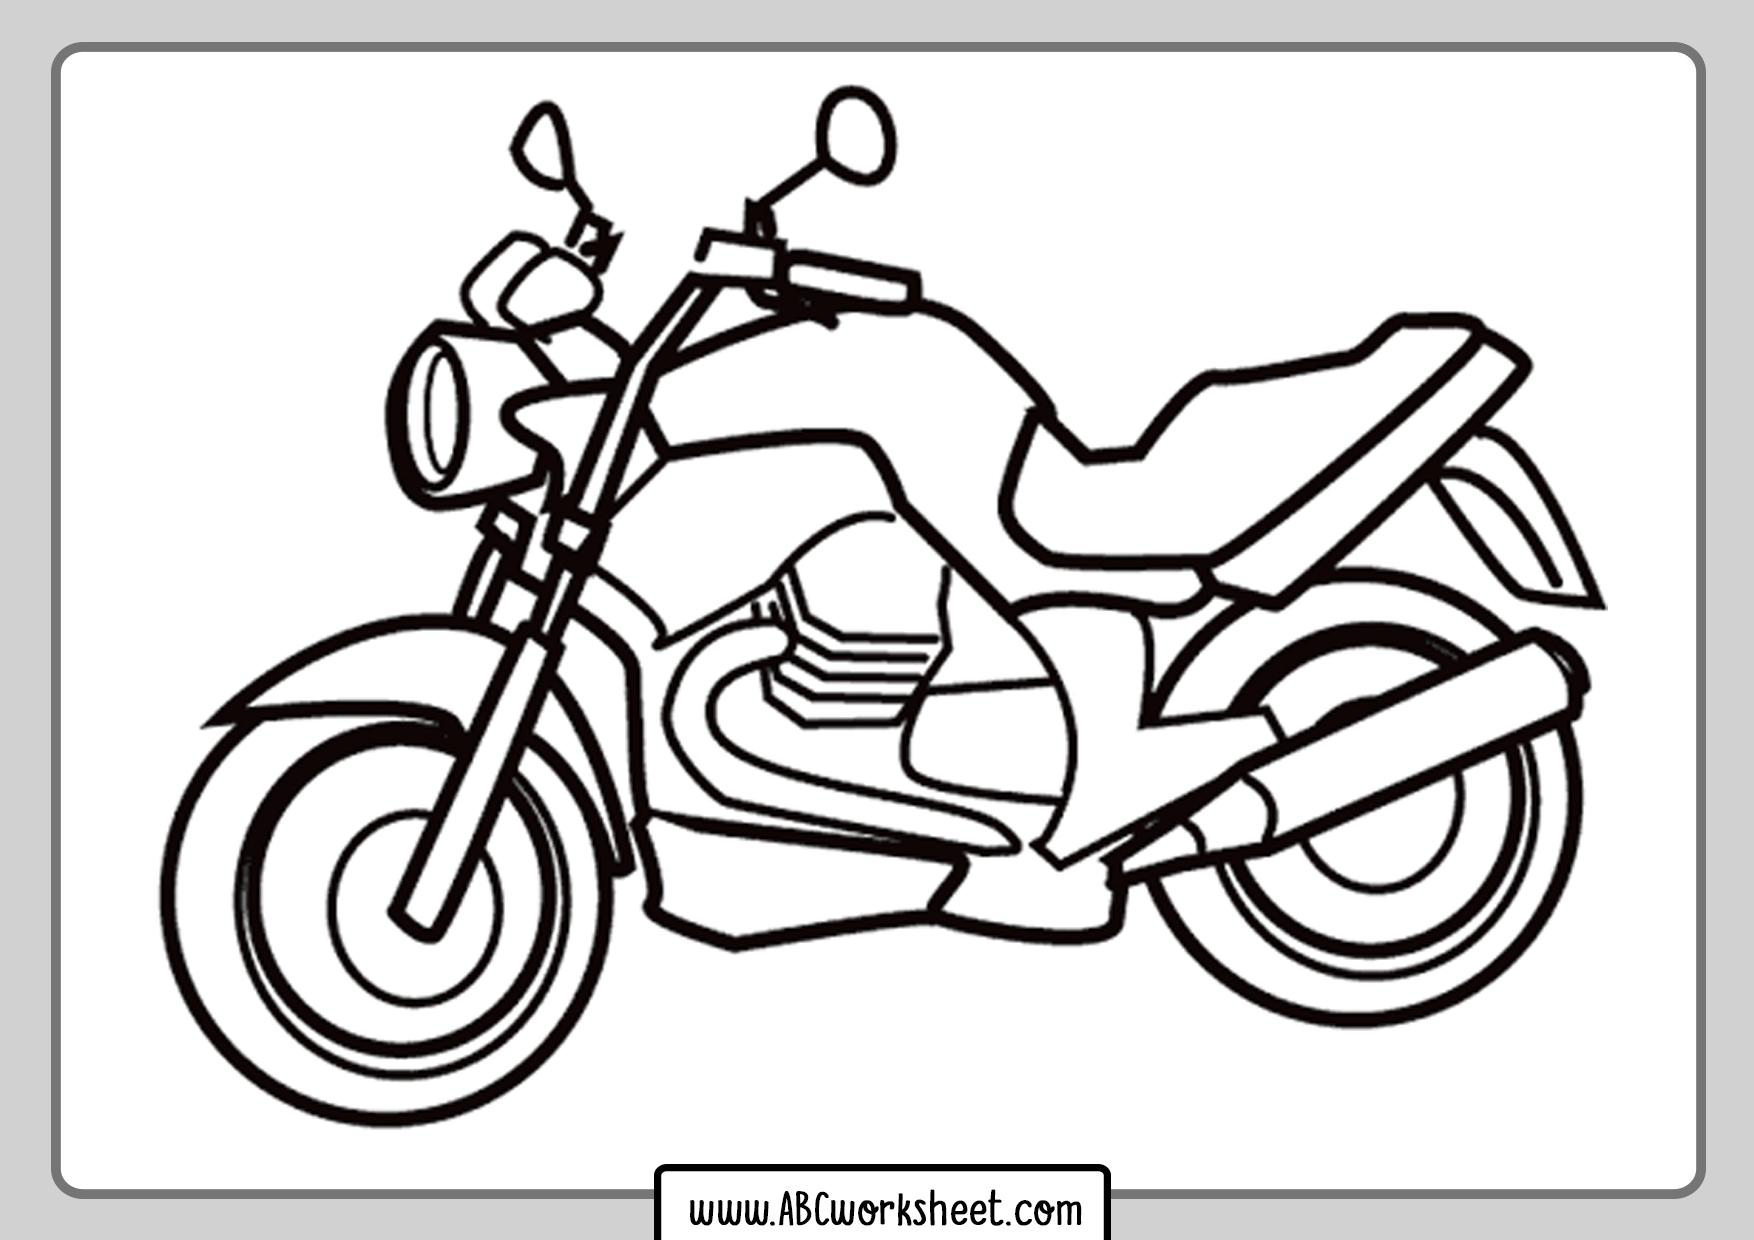 Free Printable Motorcycle coloring Pages For Kids